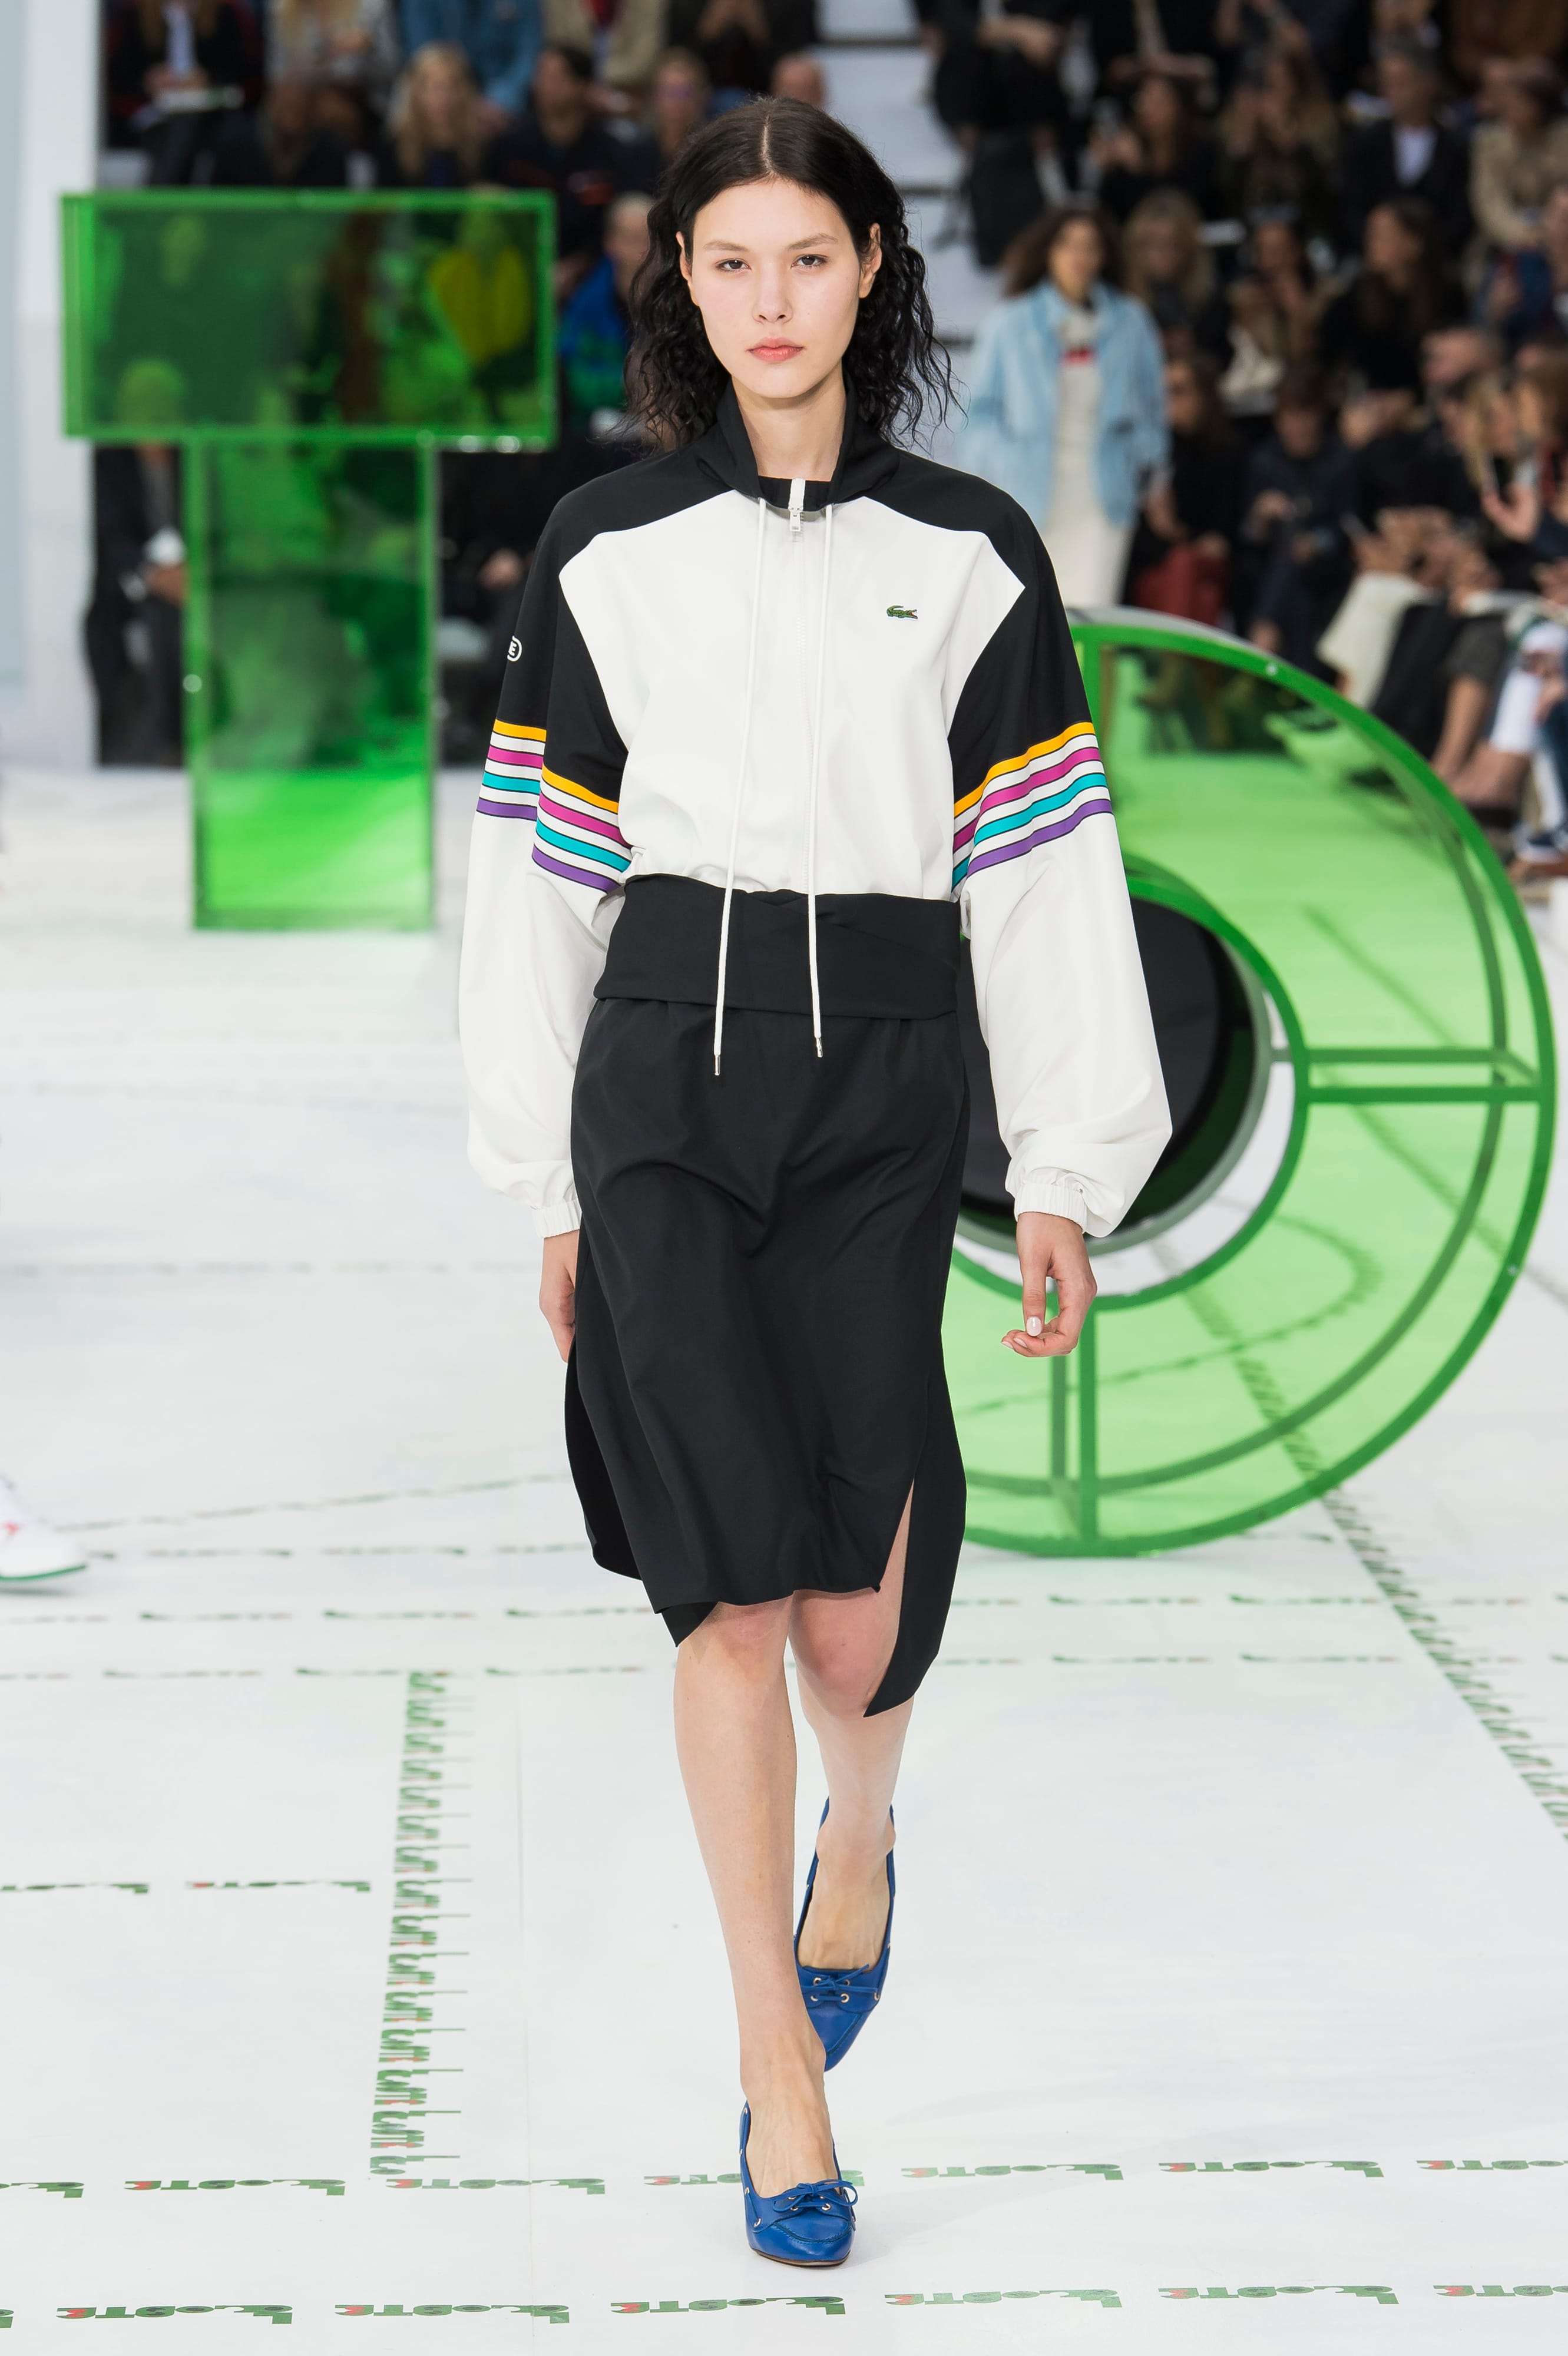 Lacoste Spring/Summer 2018 Show at 